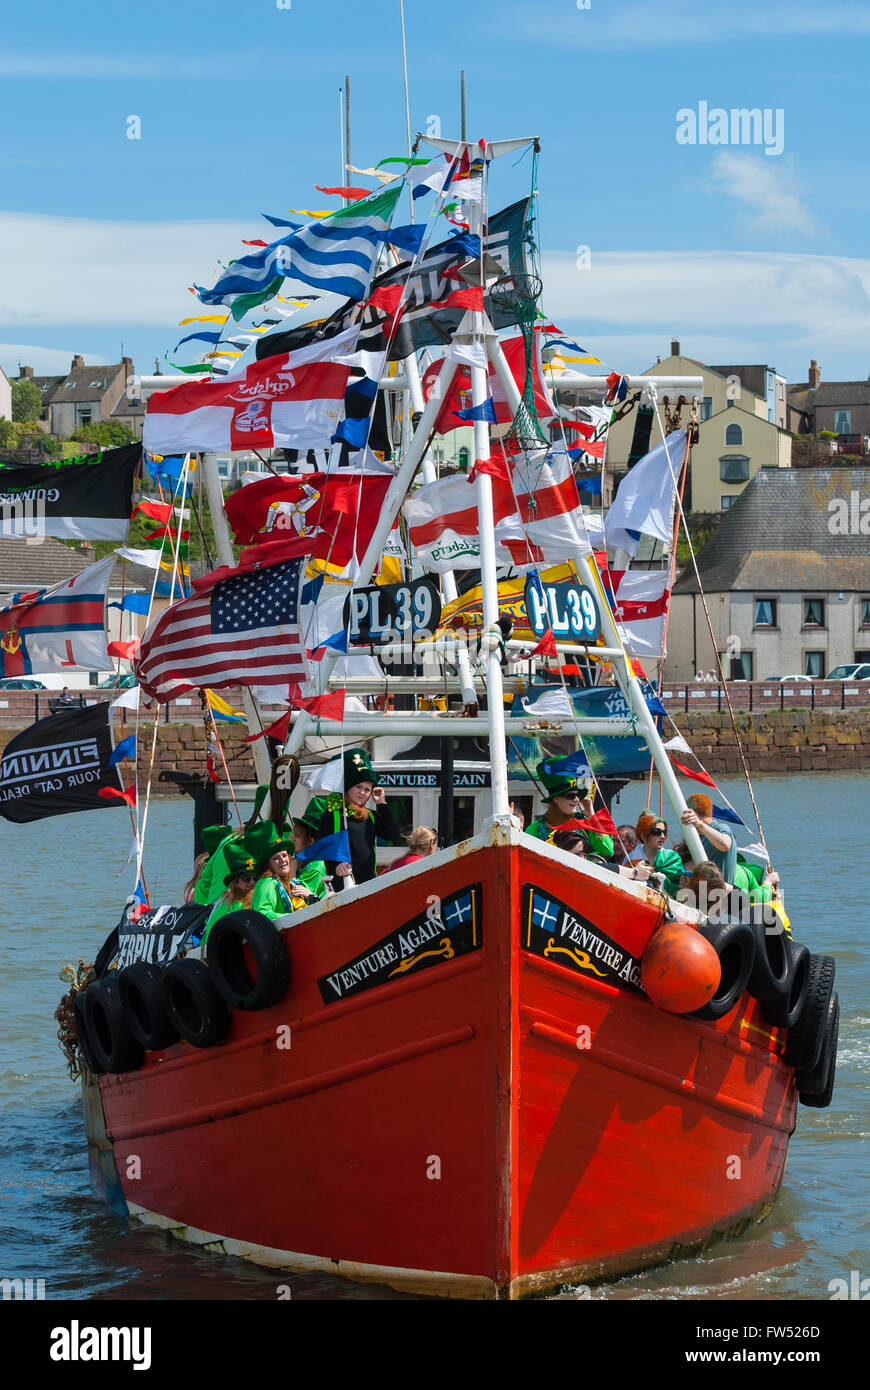 PL39 Venture Again parading in Maryport harbour before the race, Maryport, Cumbria Stock Photo